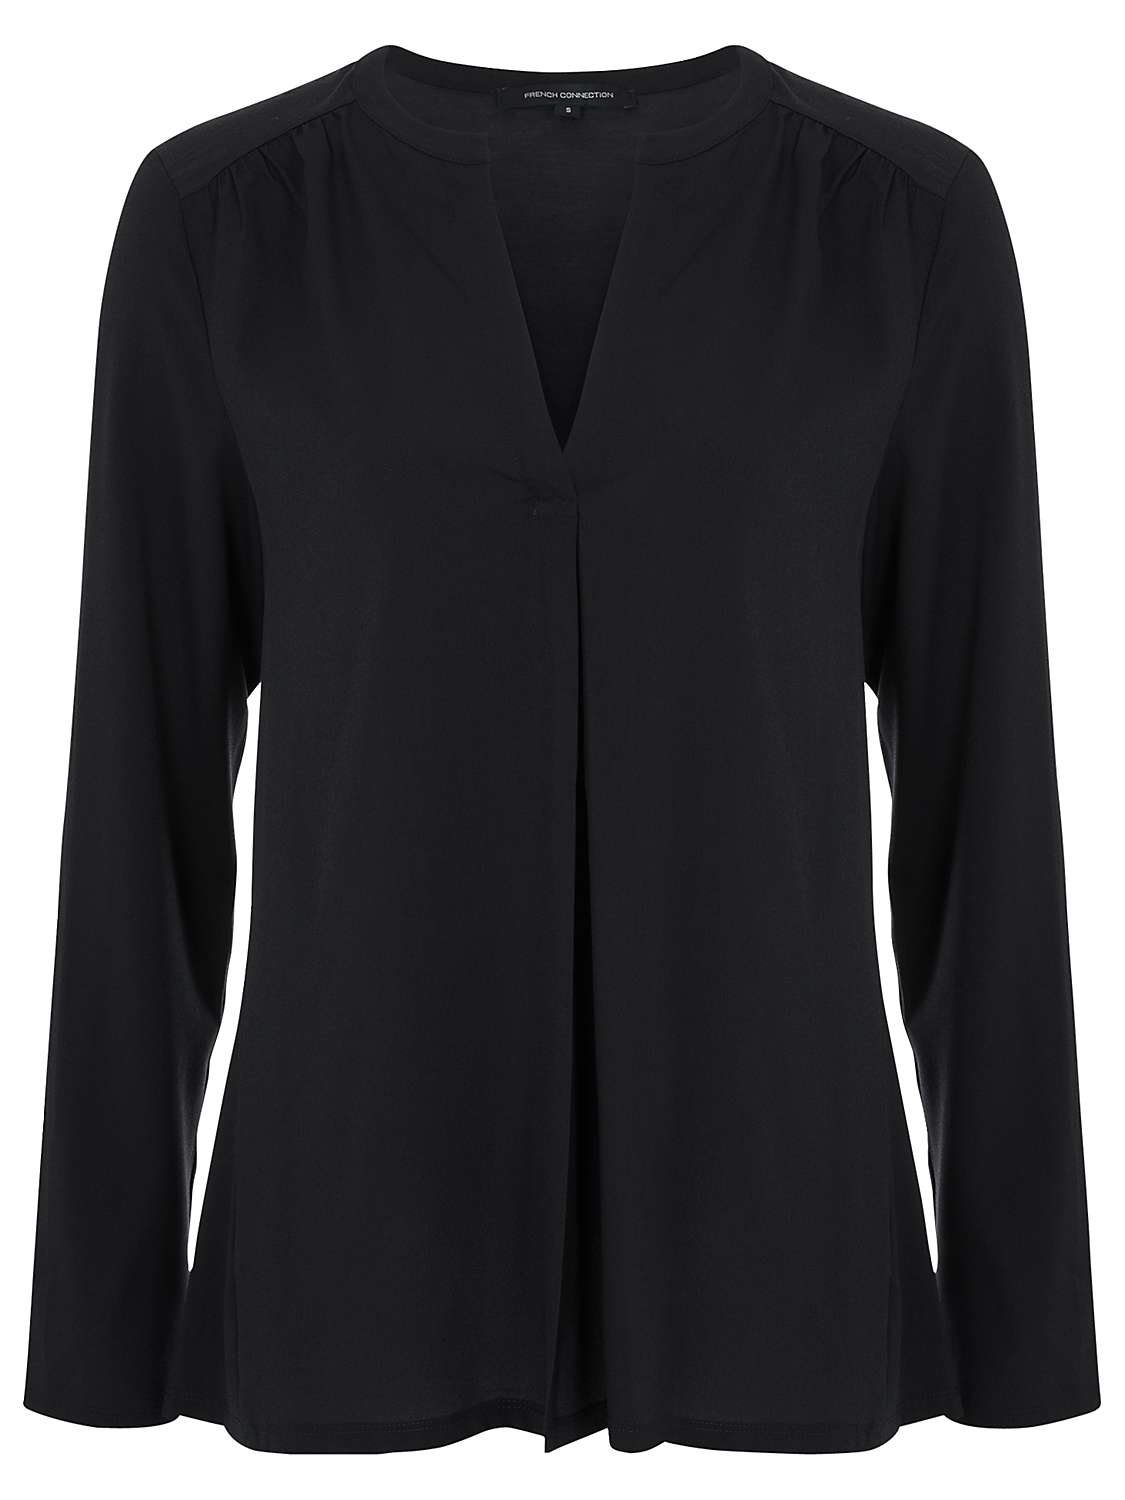 French Connection Classic Polly Plains Shirt at John Lewis & Partners